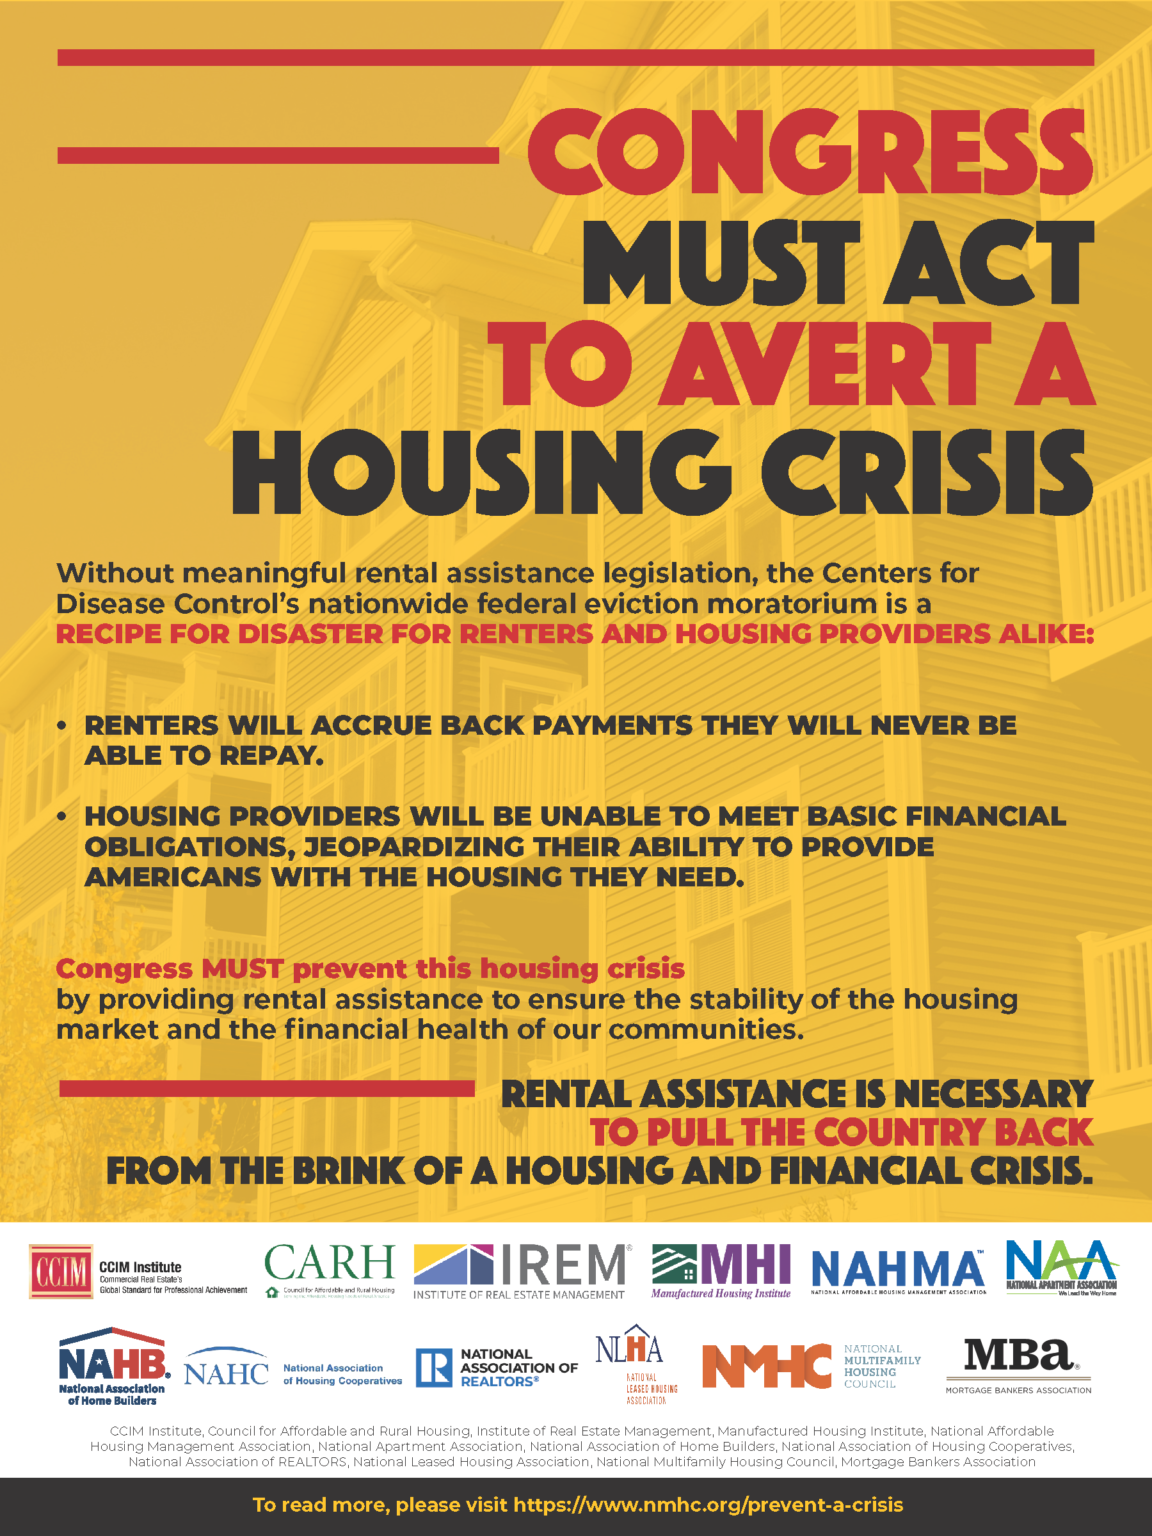 Rental Assistance Needed for Renters & Housing Providers Alike